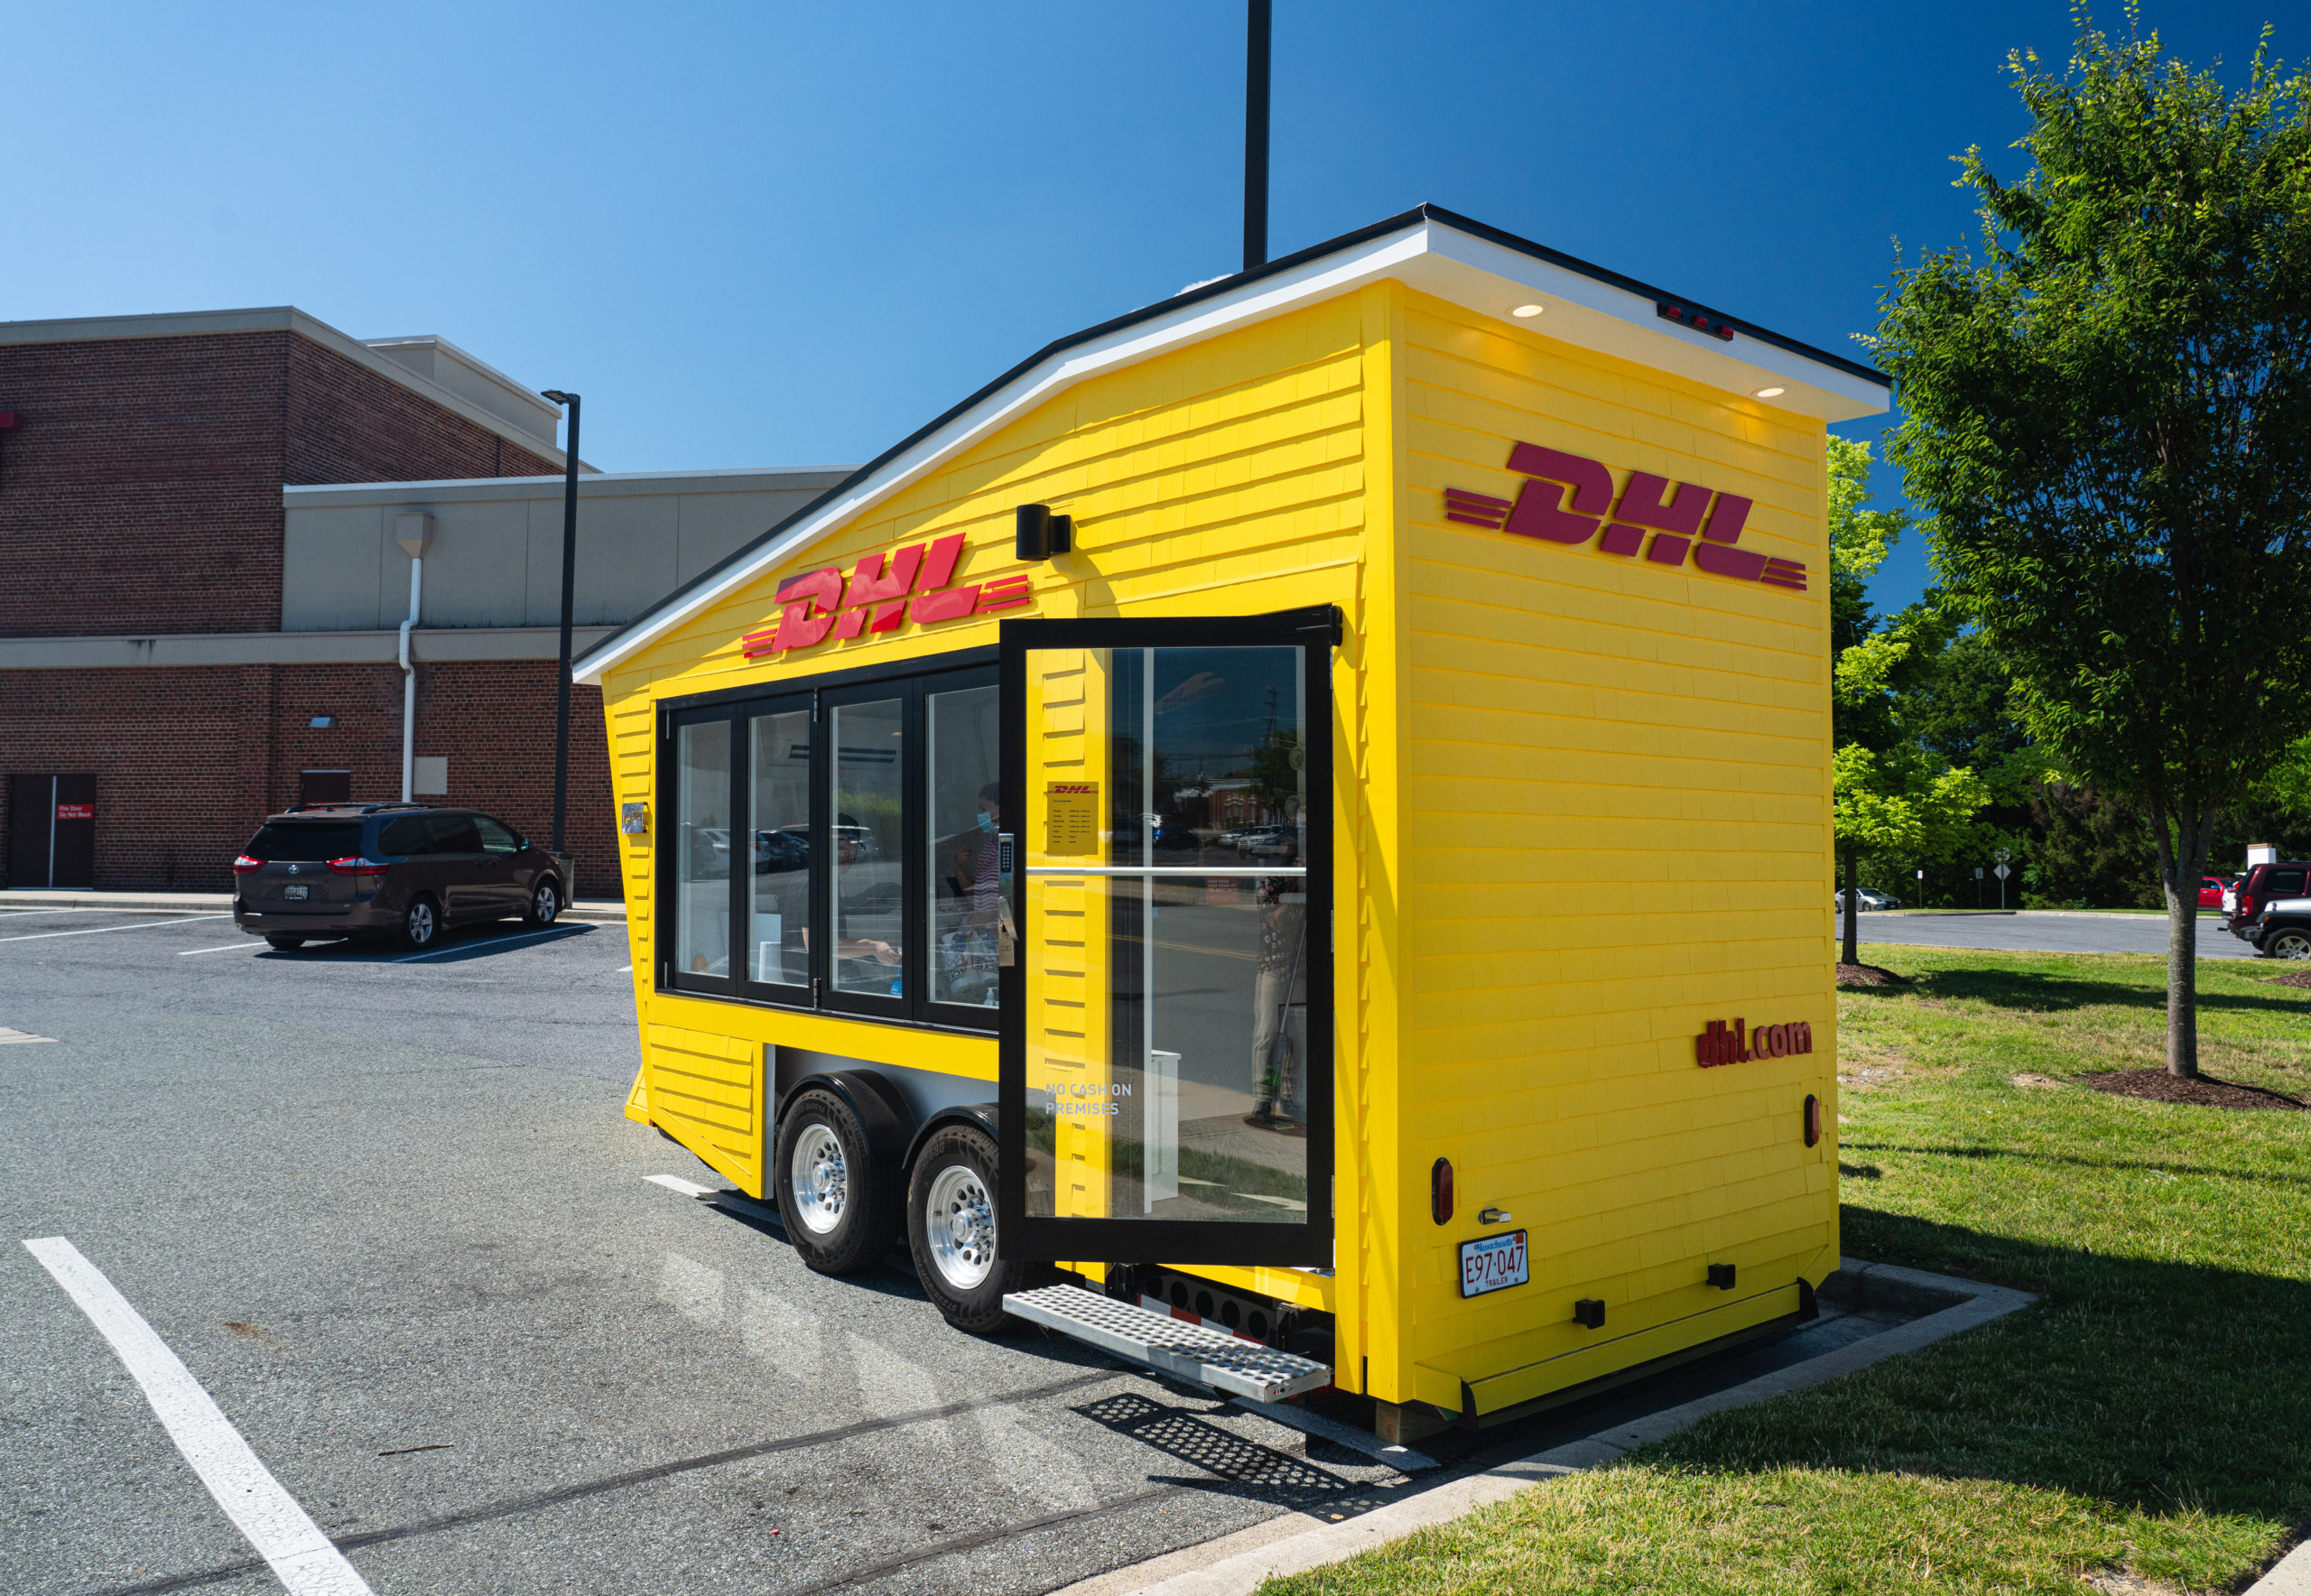 DHL's first mobile pop-up ServicePoint location. Photo by Doug Sanford Photographs, courtesy of DHL Express.